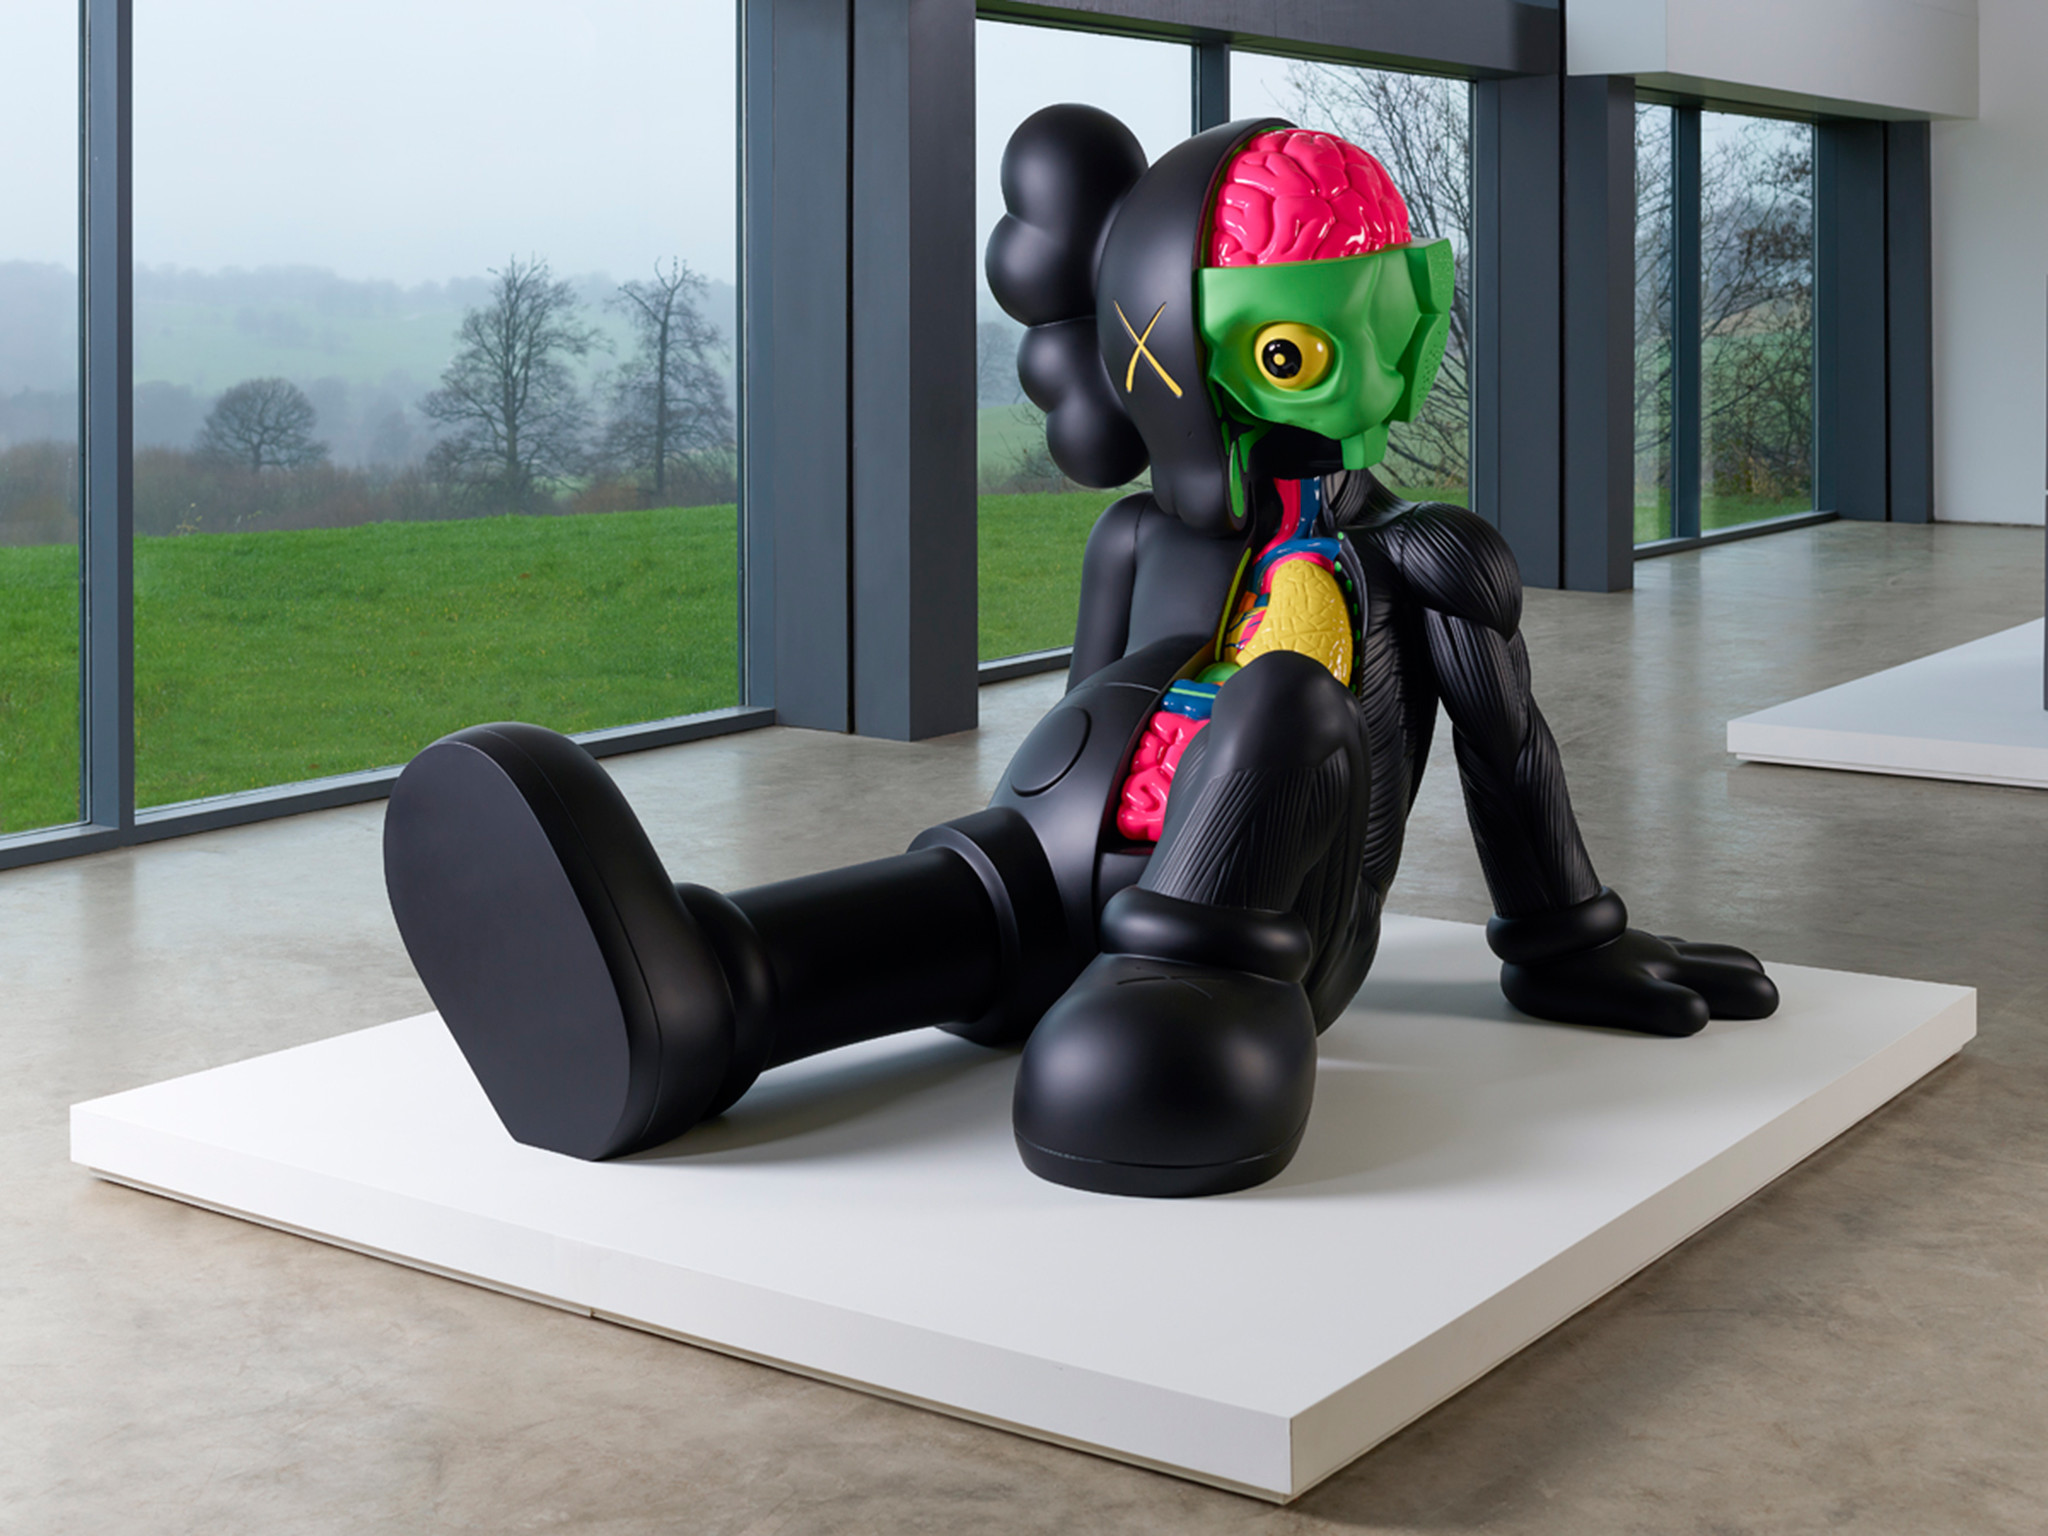 2048x1536 KAWS, Yorkshire Sculpture Park, Wakefield, review: Hipsters'...